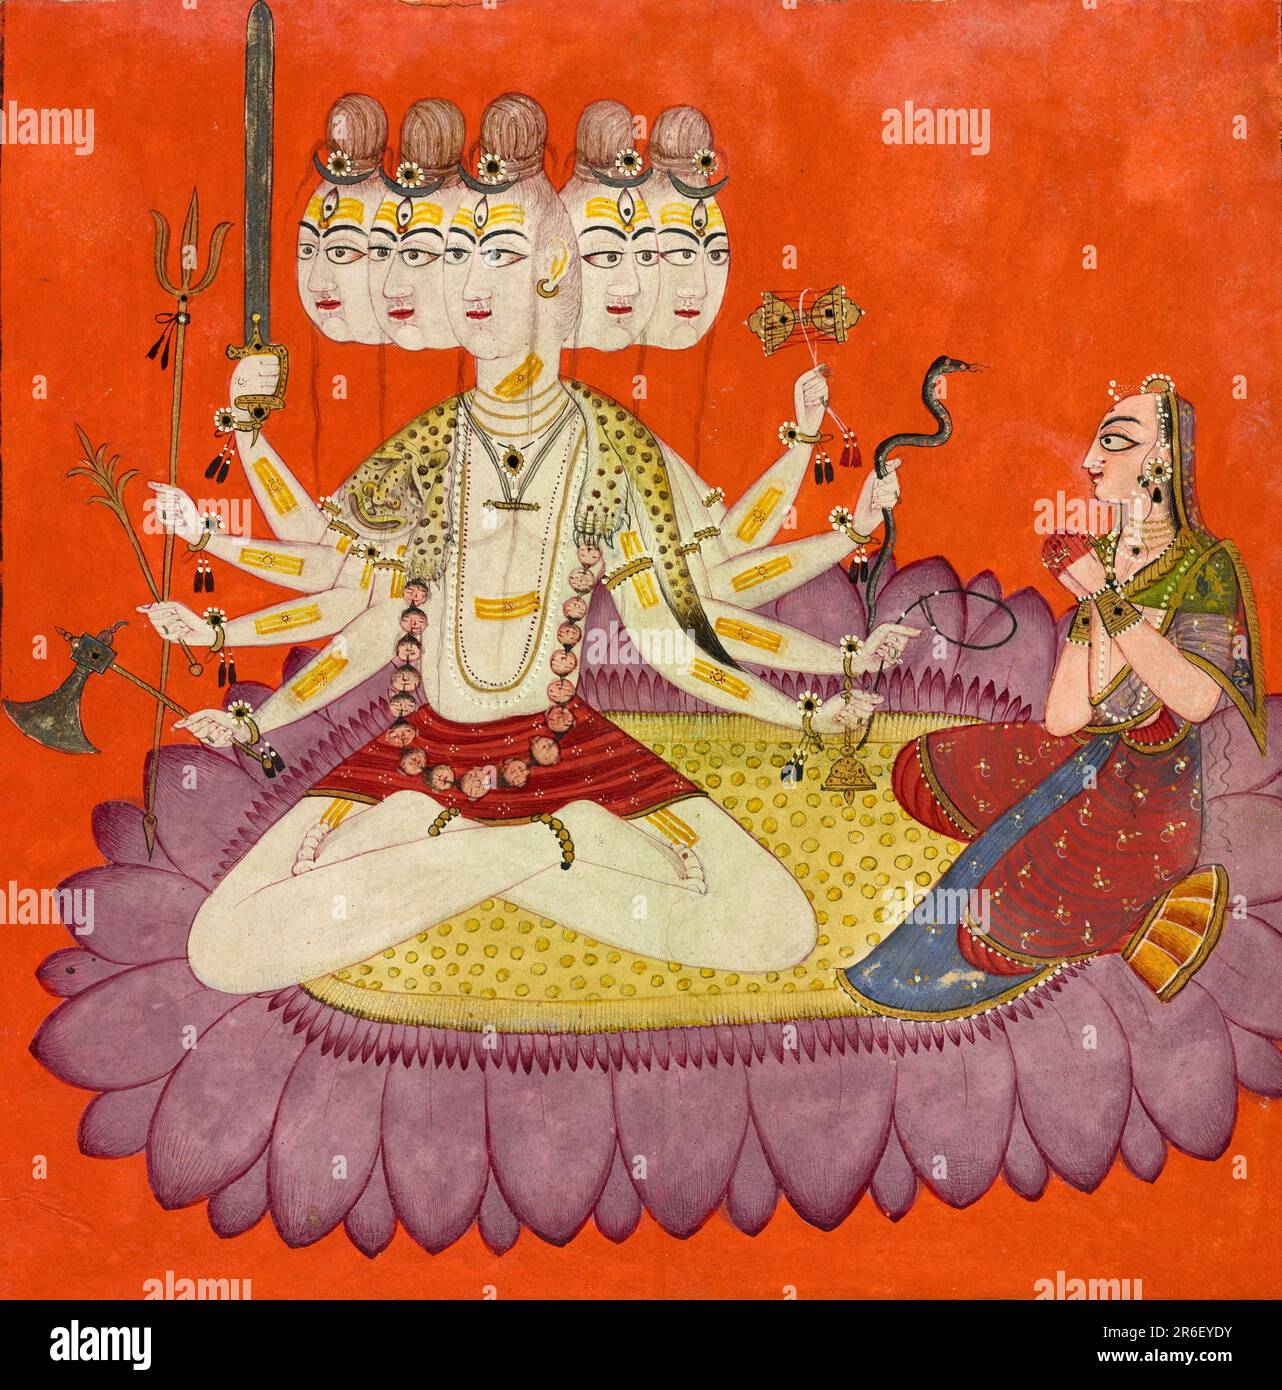 Wearing a snow-leopard skin draped over his shoulders, Sadashiva sits with the goddess on a mauve-petalled lotus floating against an orange-colored ground. Dominating the composition, his large, ash-white body captures the focus of the viewer's attention as well as that of the goddess, whose gaze is fervid and alert. The five-headed deity has eight arms that hold (clockwise from the top right) a drum, snake, noose, bell, axe, grain sheath, trident, and sword. Date: ca. 1690. Origin: Nurpur, Himachal Pradesh state, India. Opaque watercolor, gold, and applied beetle wing on paper. Museum: Freer Stock Photo